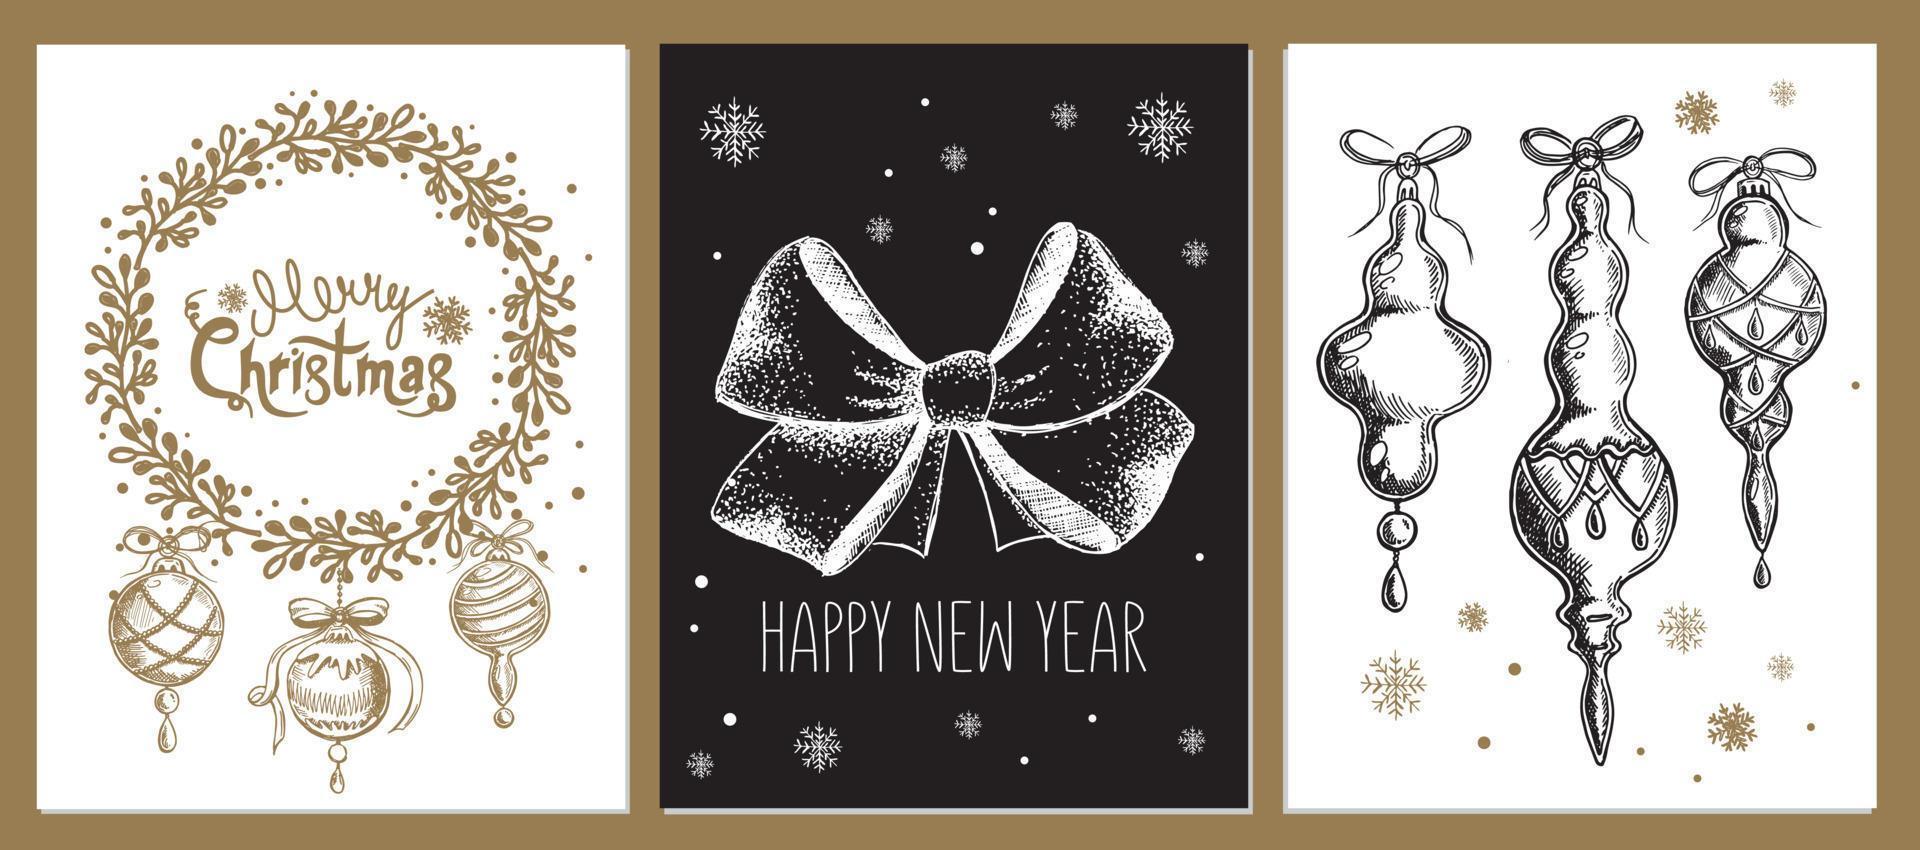 Christmas Greeting card. Design element in doodle style. vector